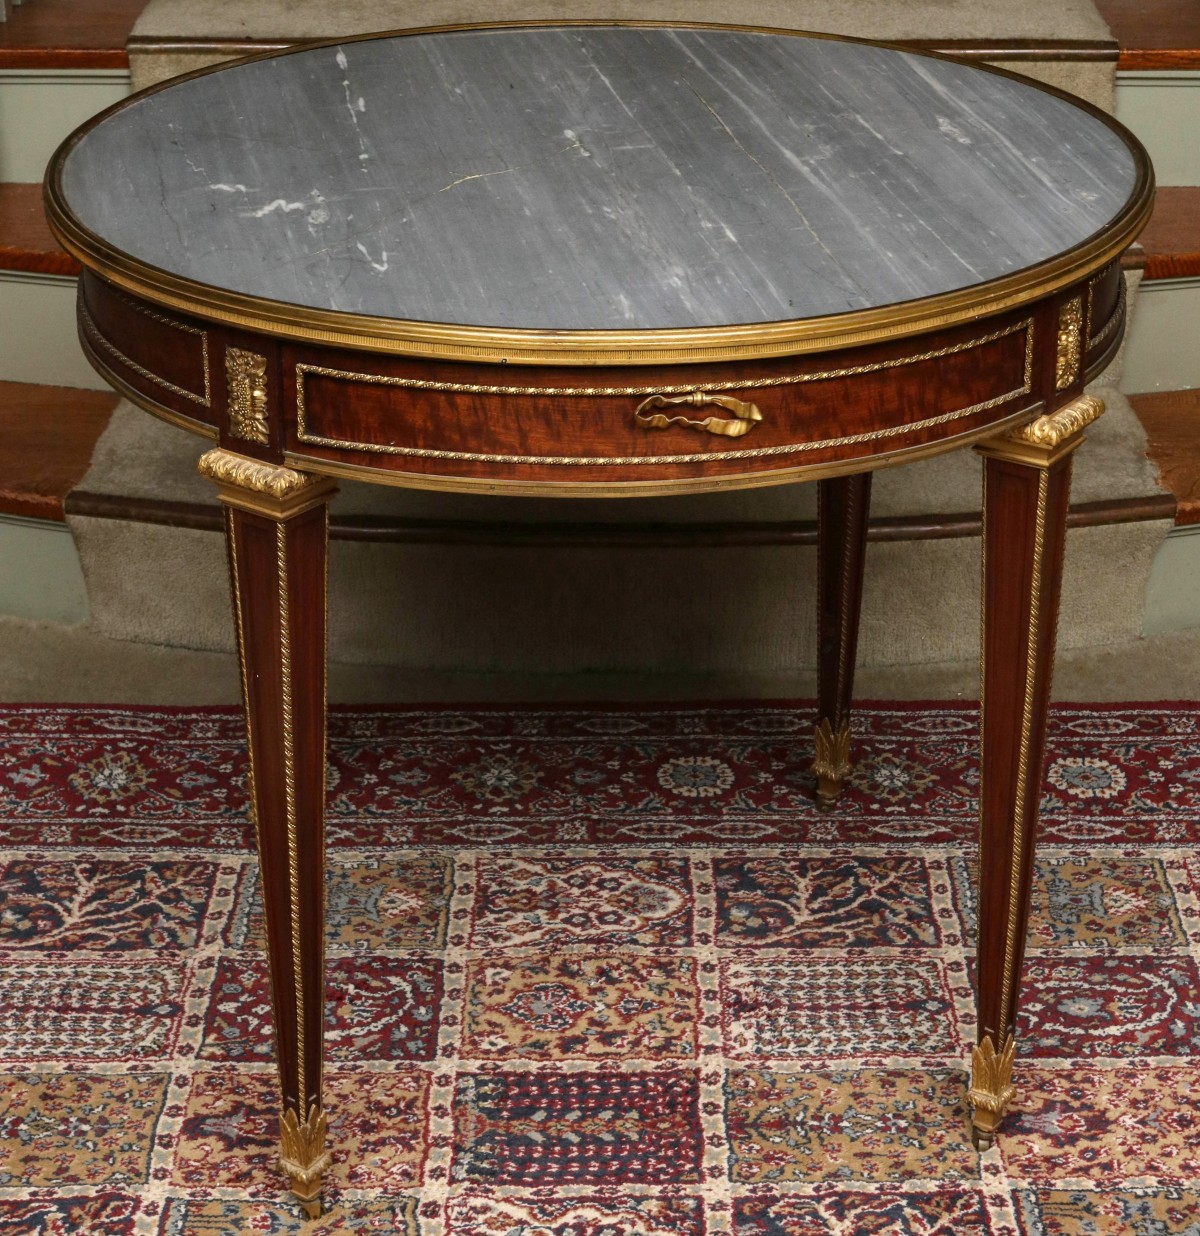 A VERY FINE FRENCH TABLE IN POOR CONDITION